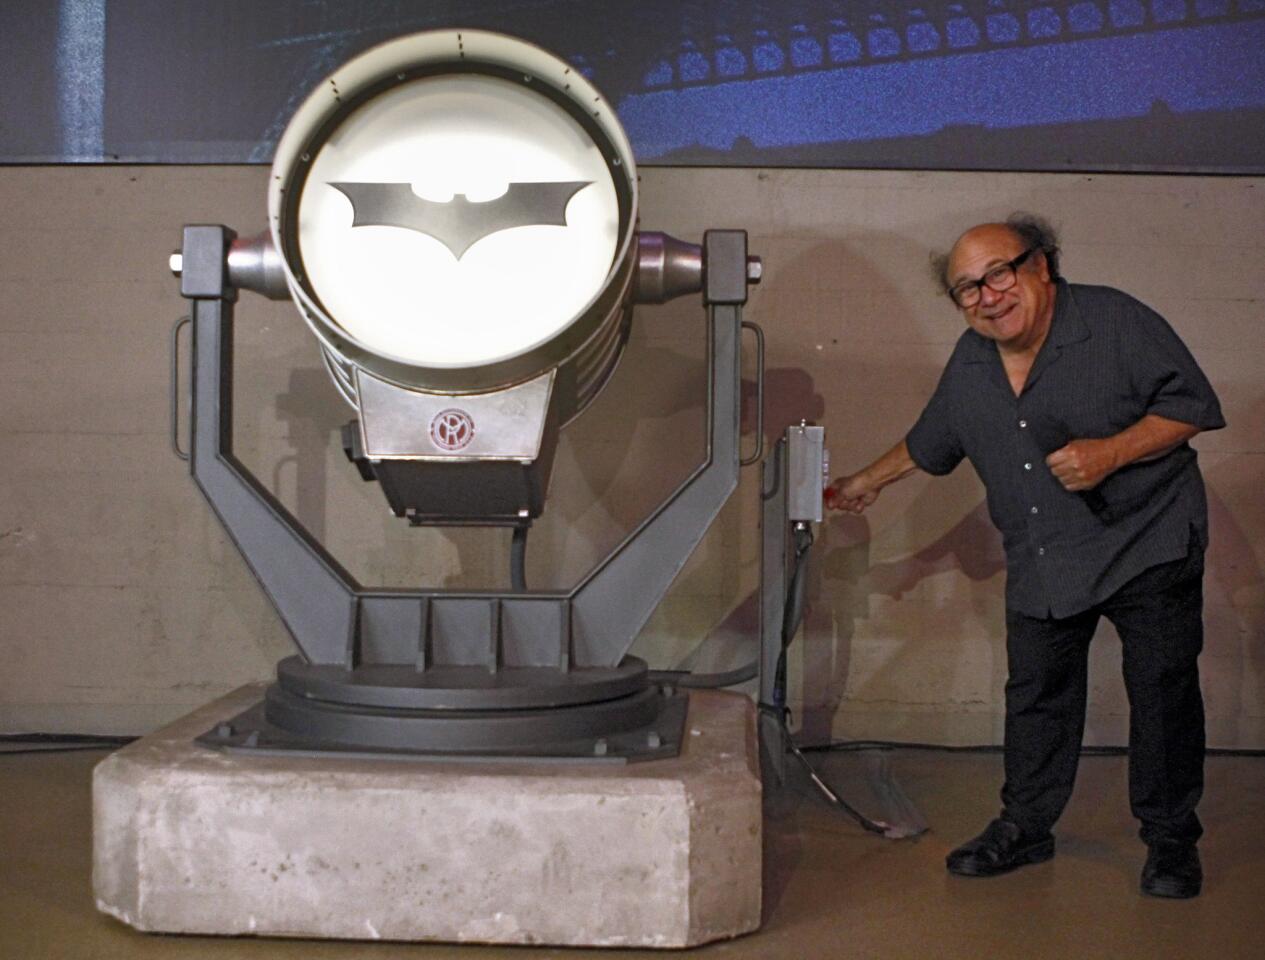 Actor Danny DeVito, who played Edward Cobblepot, better known as The Penguin, from the 1992 movie Batman Returns, throws the switch on the bat signal for the official opening of the Batman's 75th Anniversary Warner Bros VIP Studio Tour exhibit at the Warner Bros. studios in Burbank on Thursday, June 26, 2014.